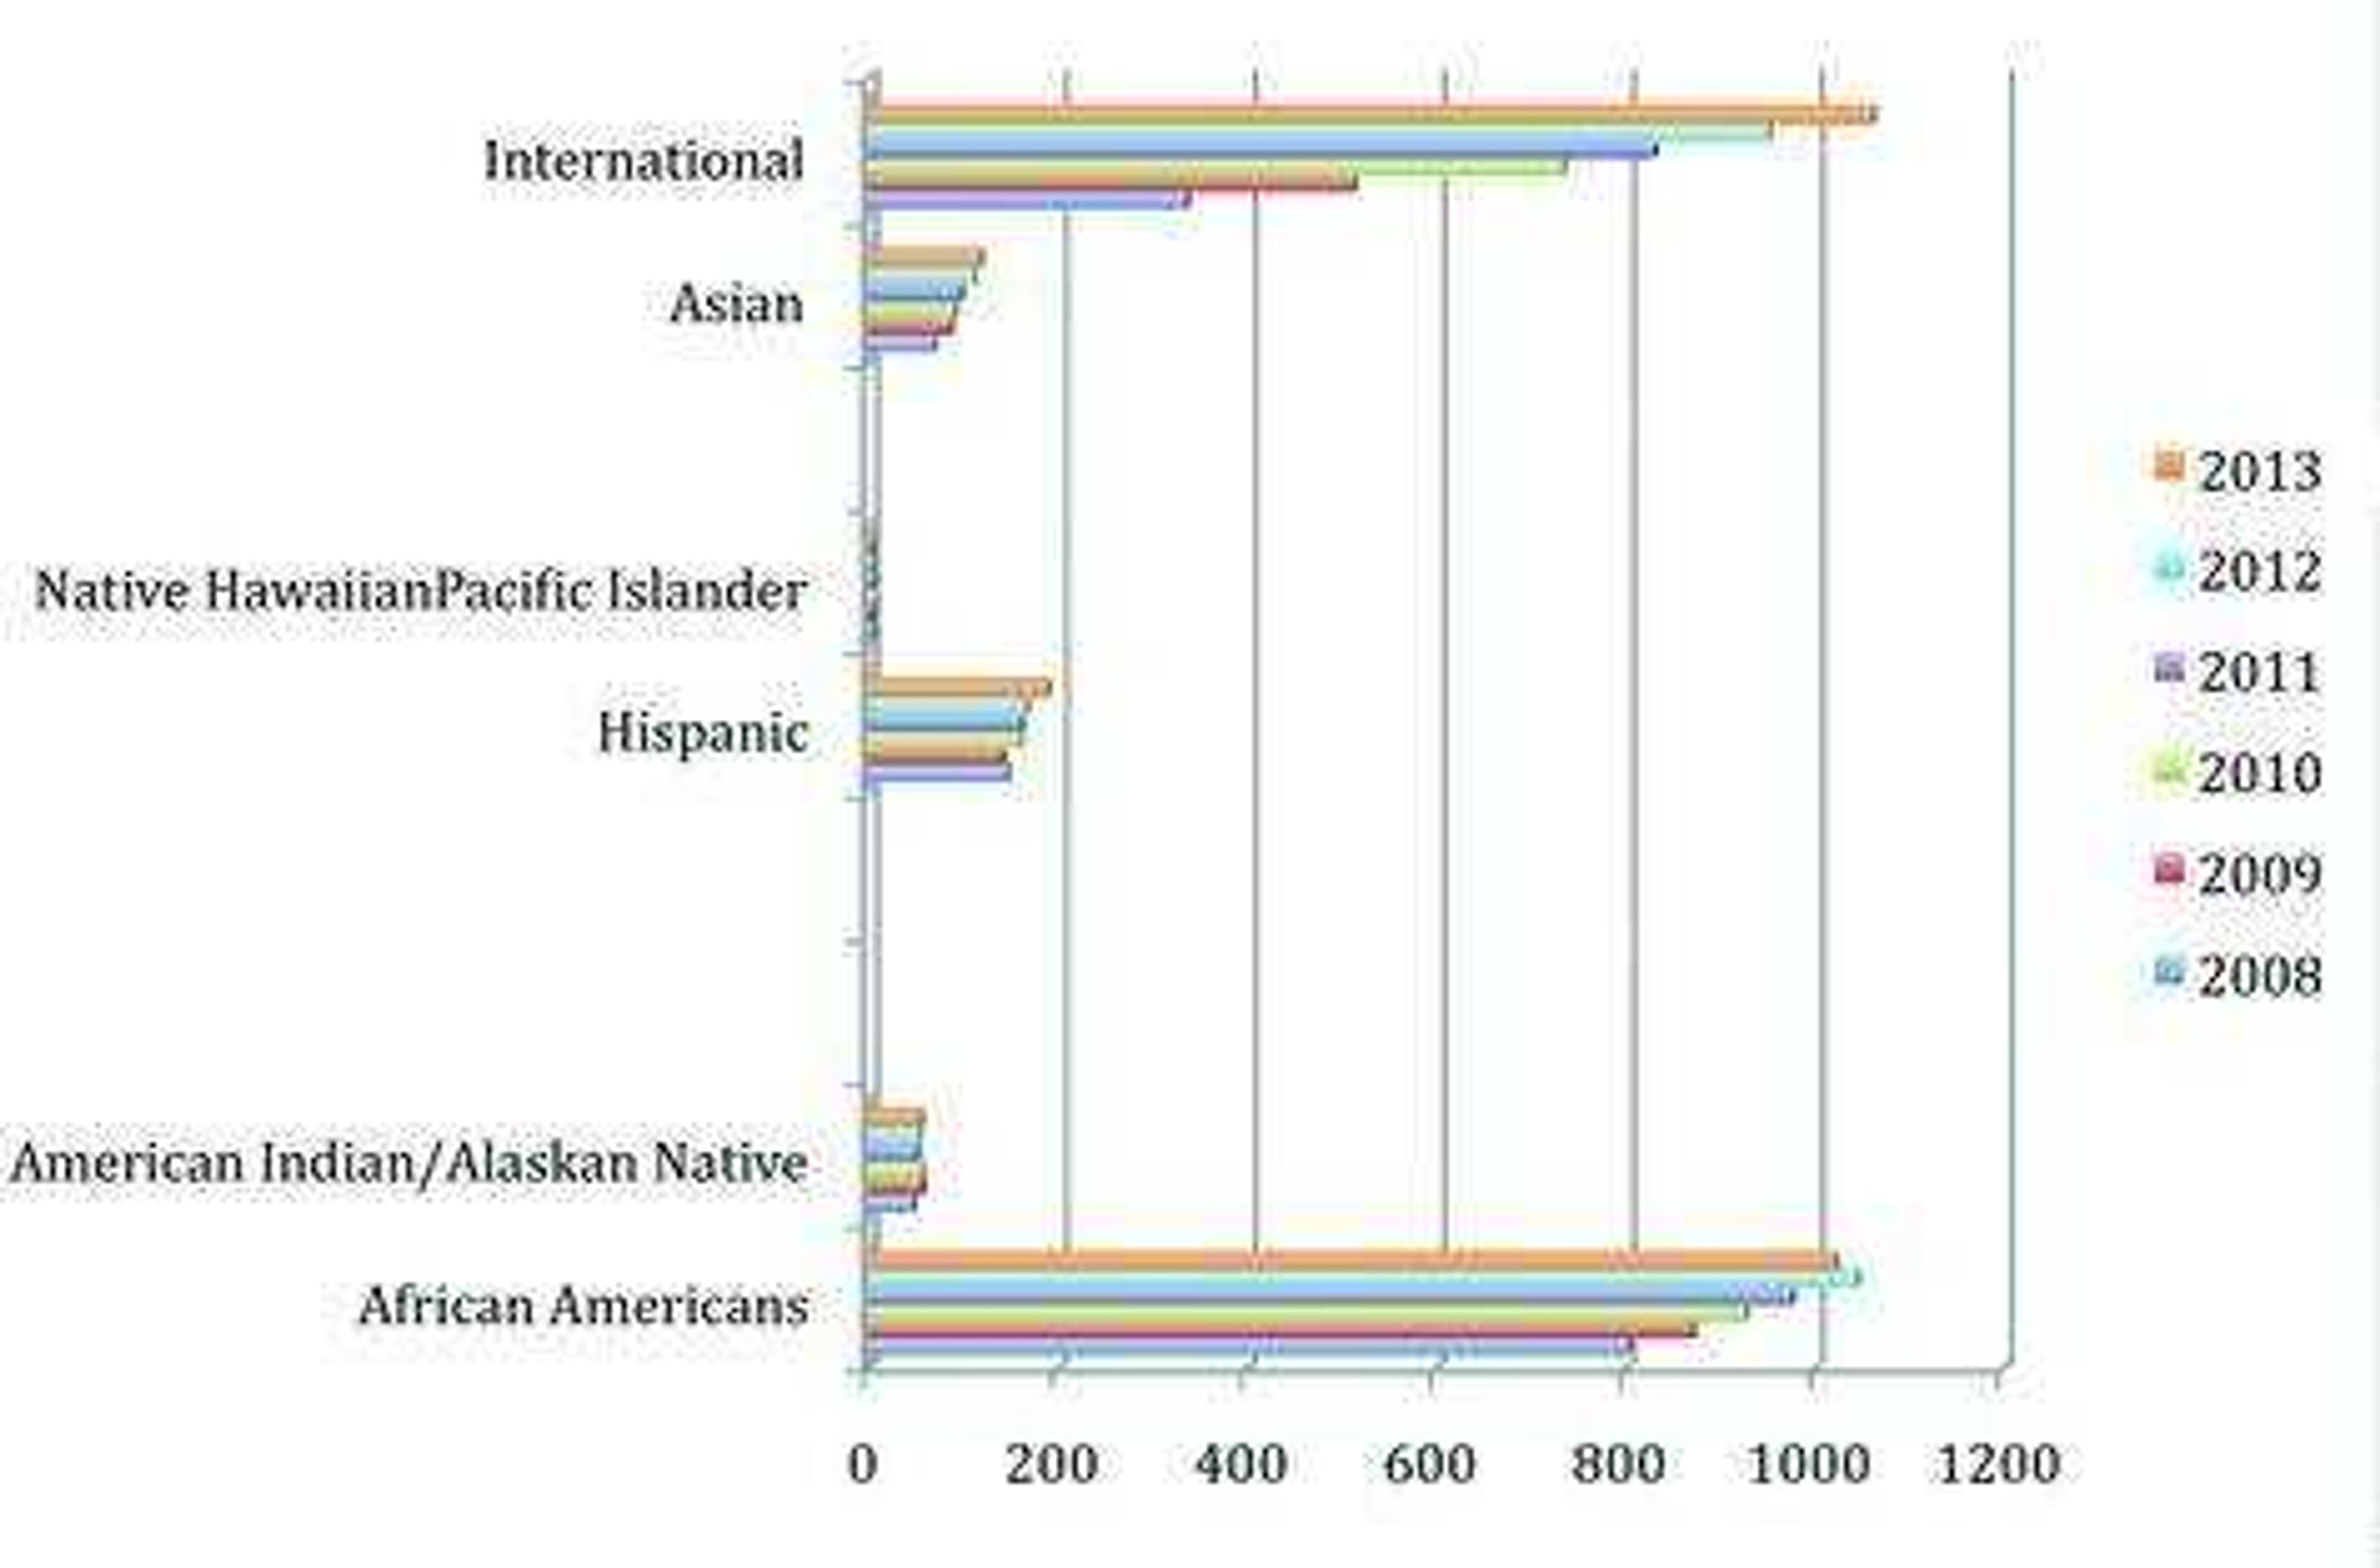 Various ethnicities have seen a rise in enrollment since 2008. Infographic by Amber Cason